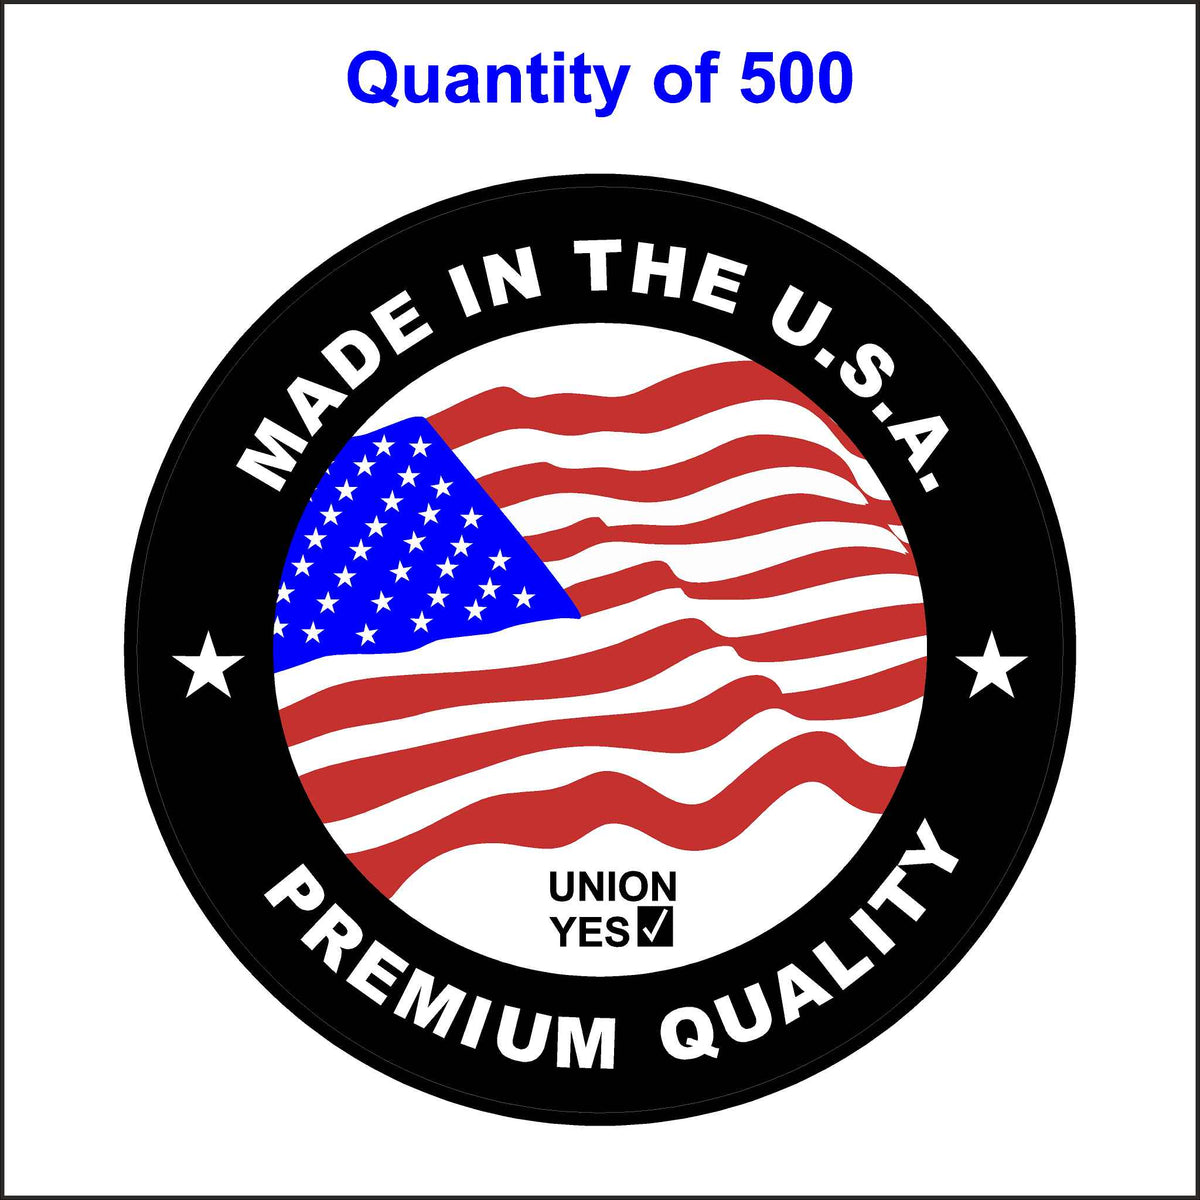 Made in the USA Premium Quality Union Stickers. 500 Quantity.